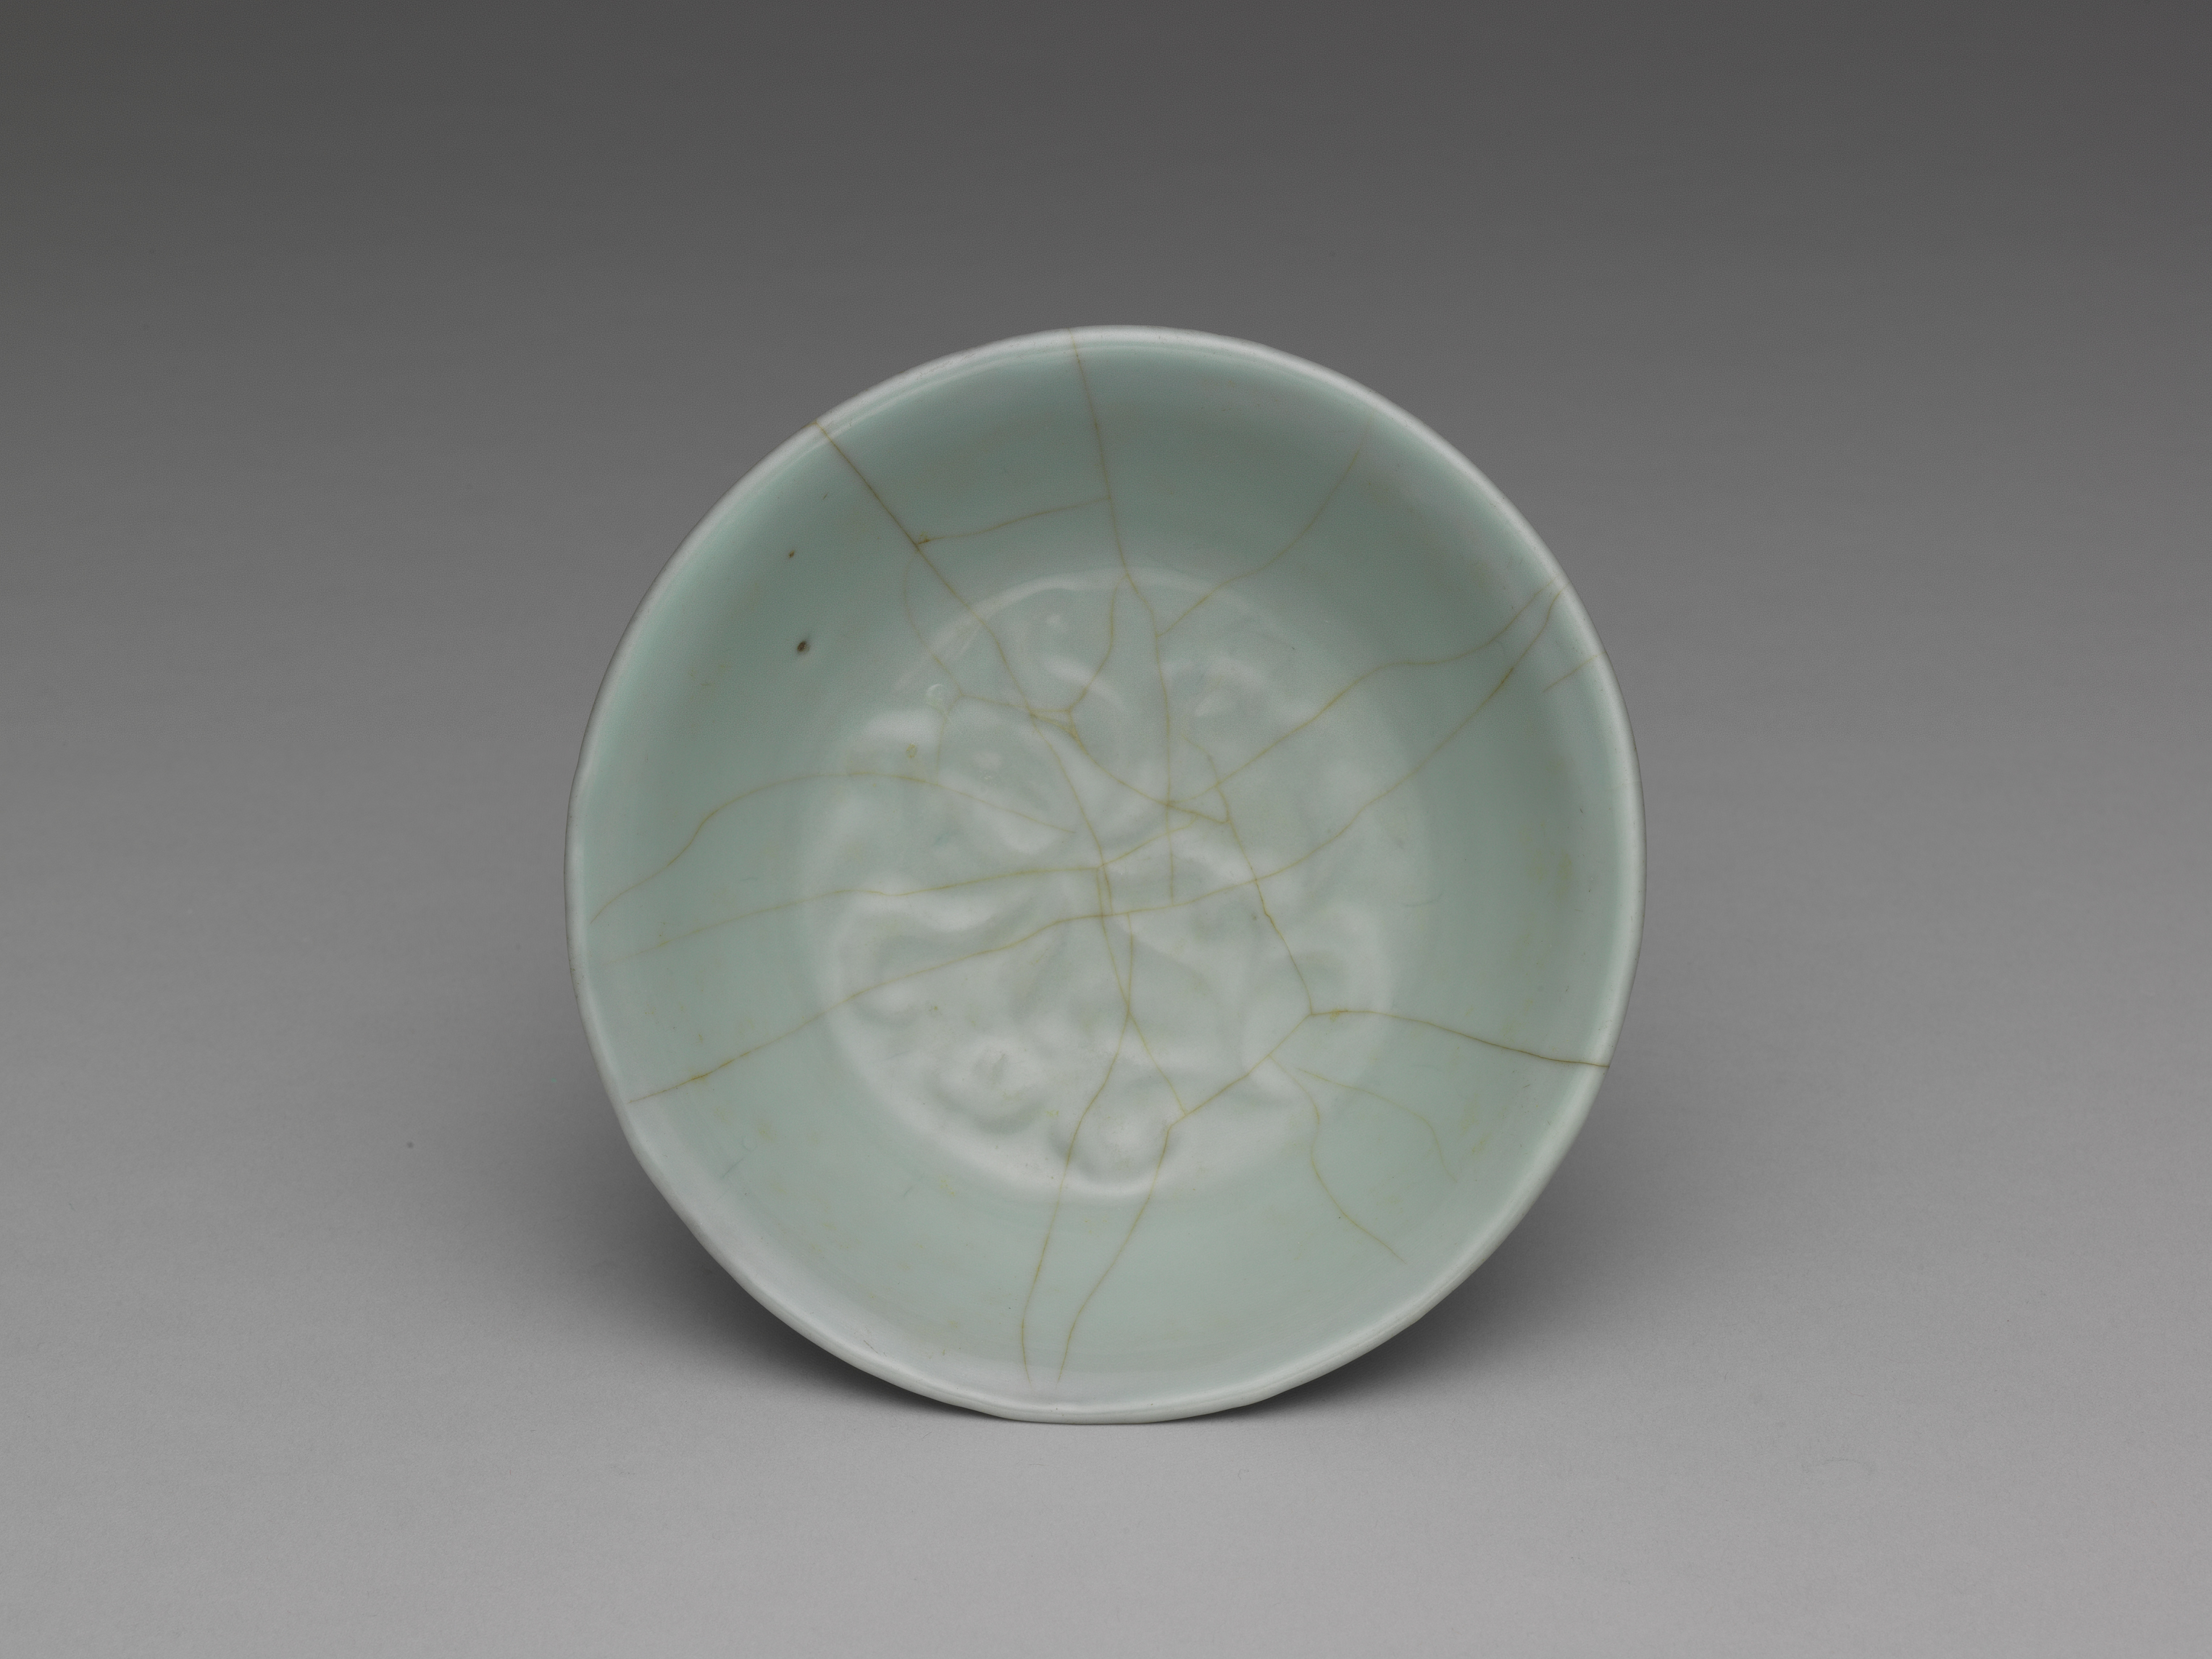 Brush washer with lotus-petal design in celadon glaze
Guan ware, Southern Song dynasty, 12th-13th century
